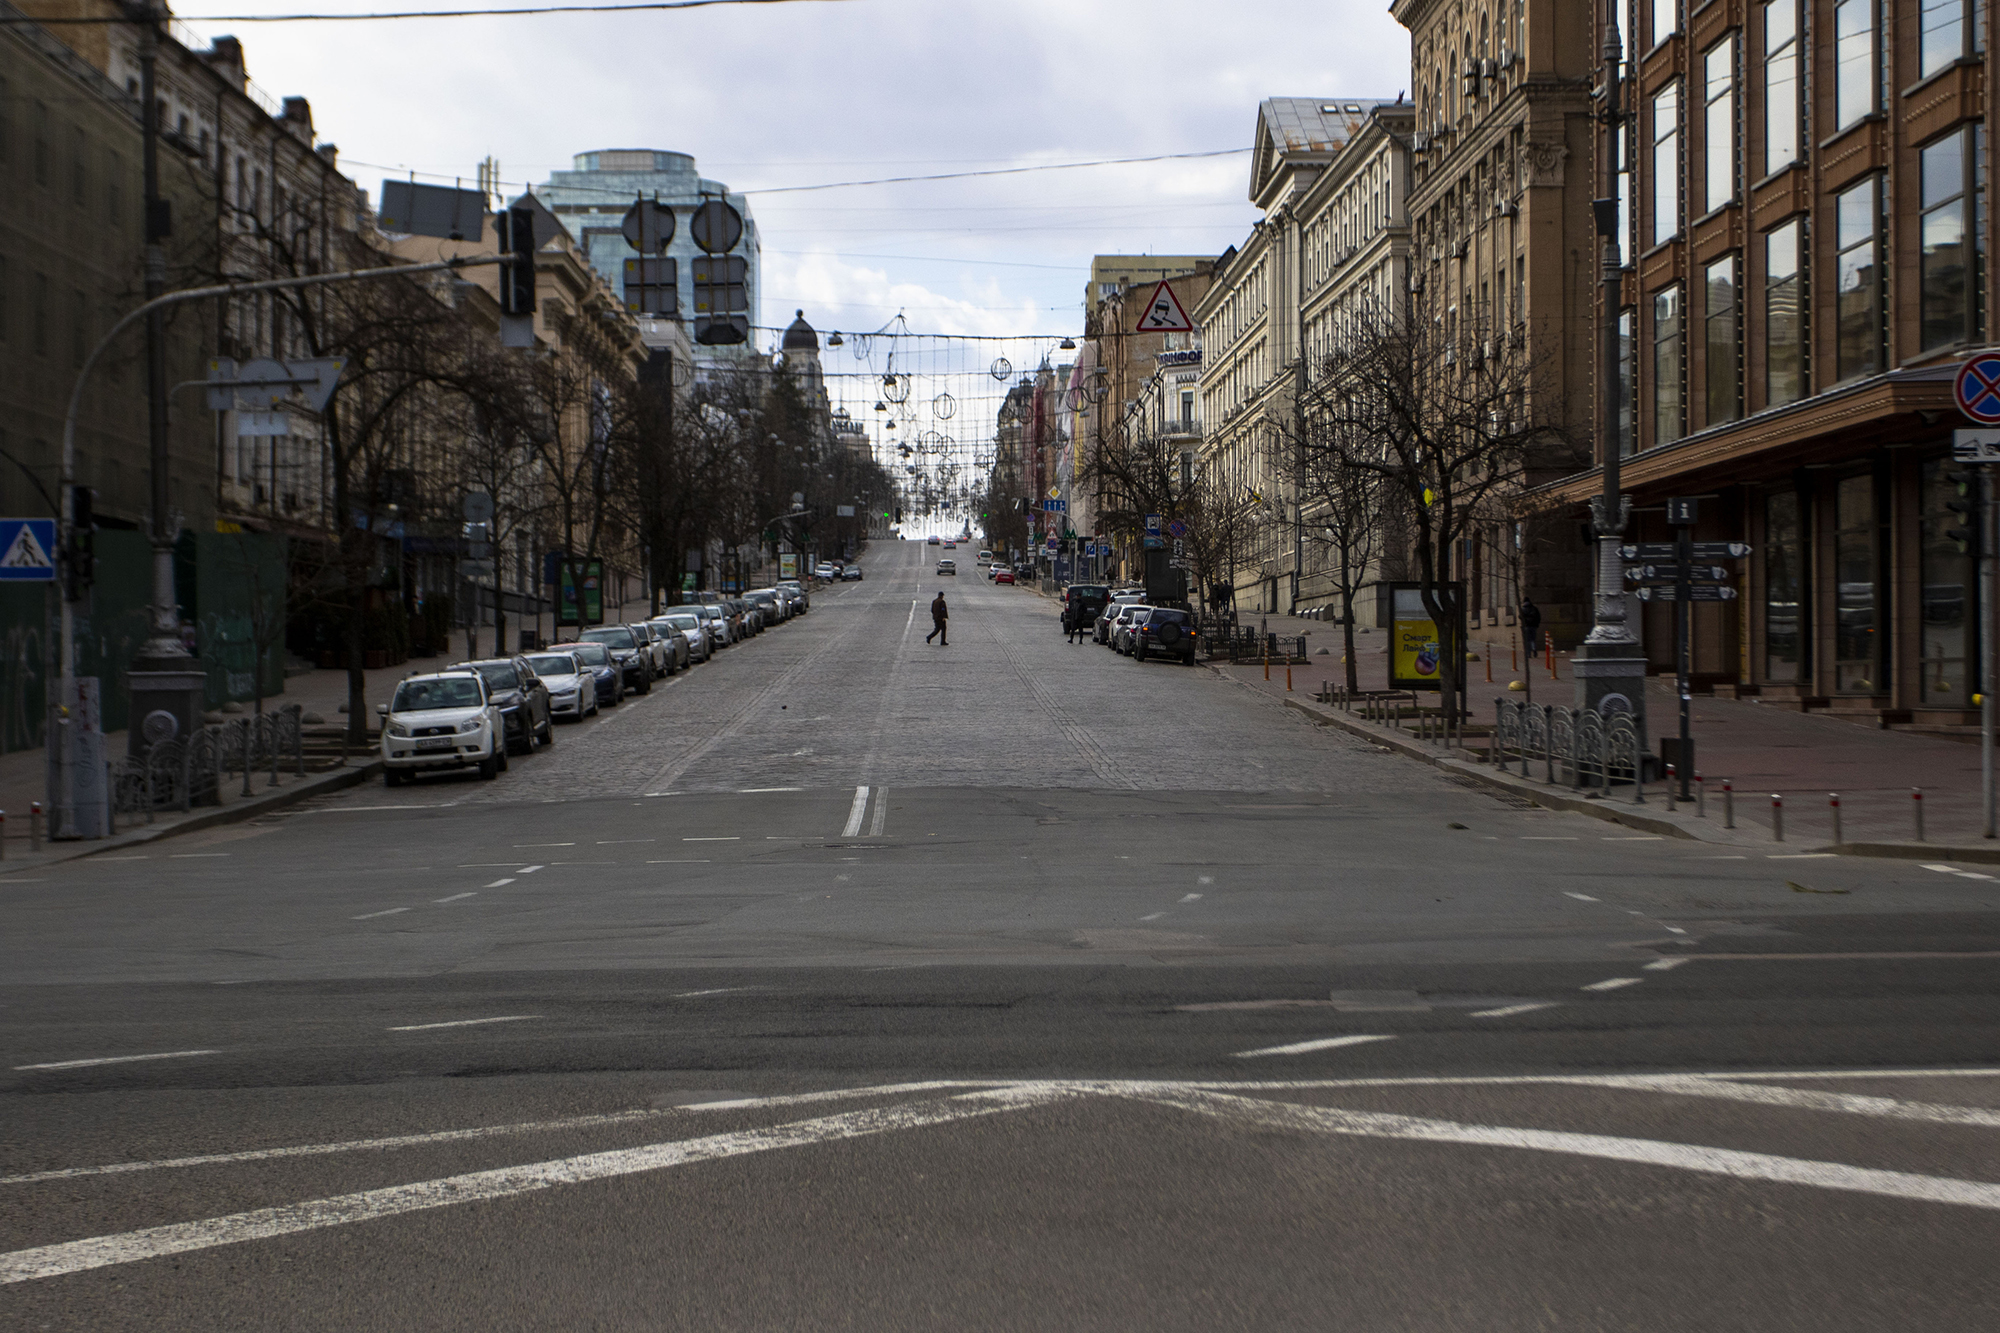 A man walks across what would normally be a busy road during the curfew in Kyiv, Ukraine, on March 27.